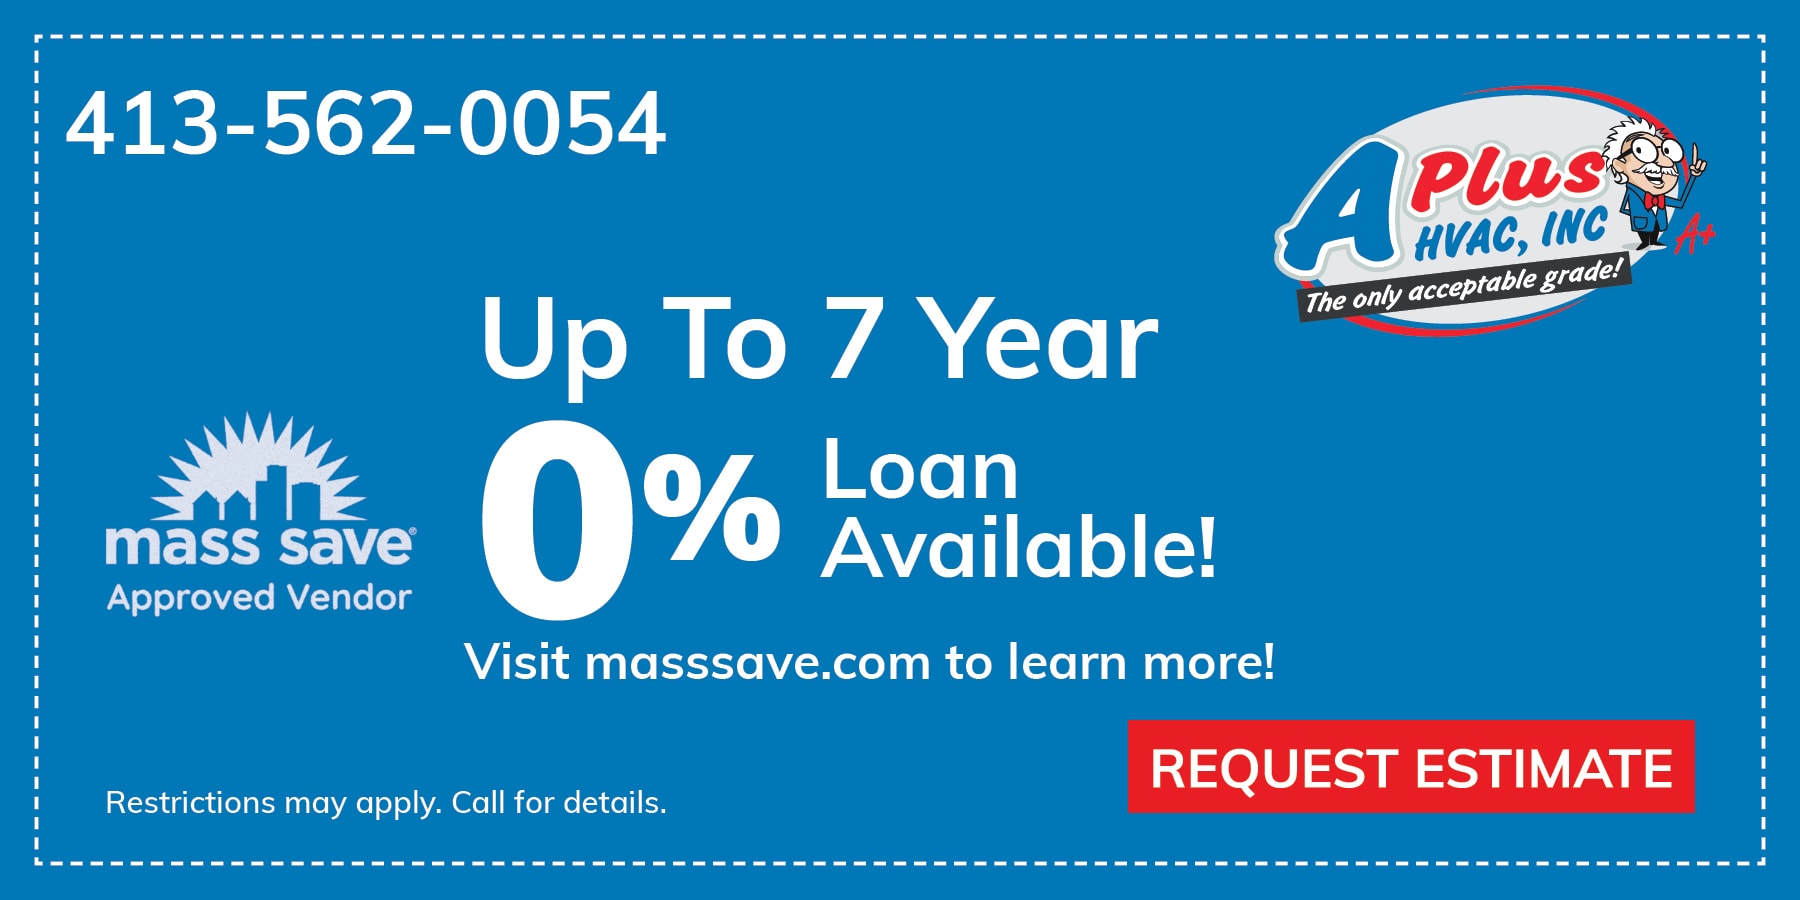 Up to 7 year 0% loan with Mass Save